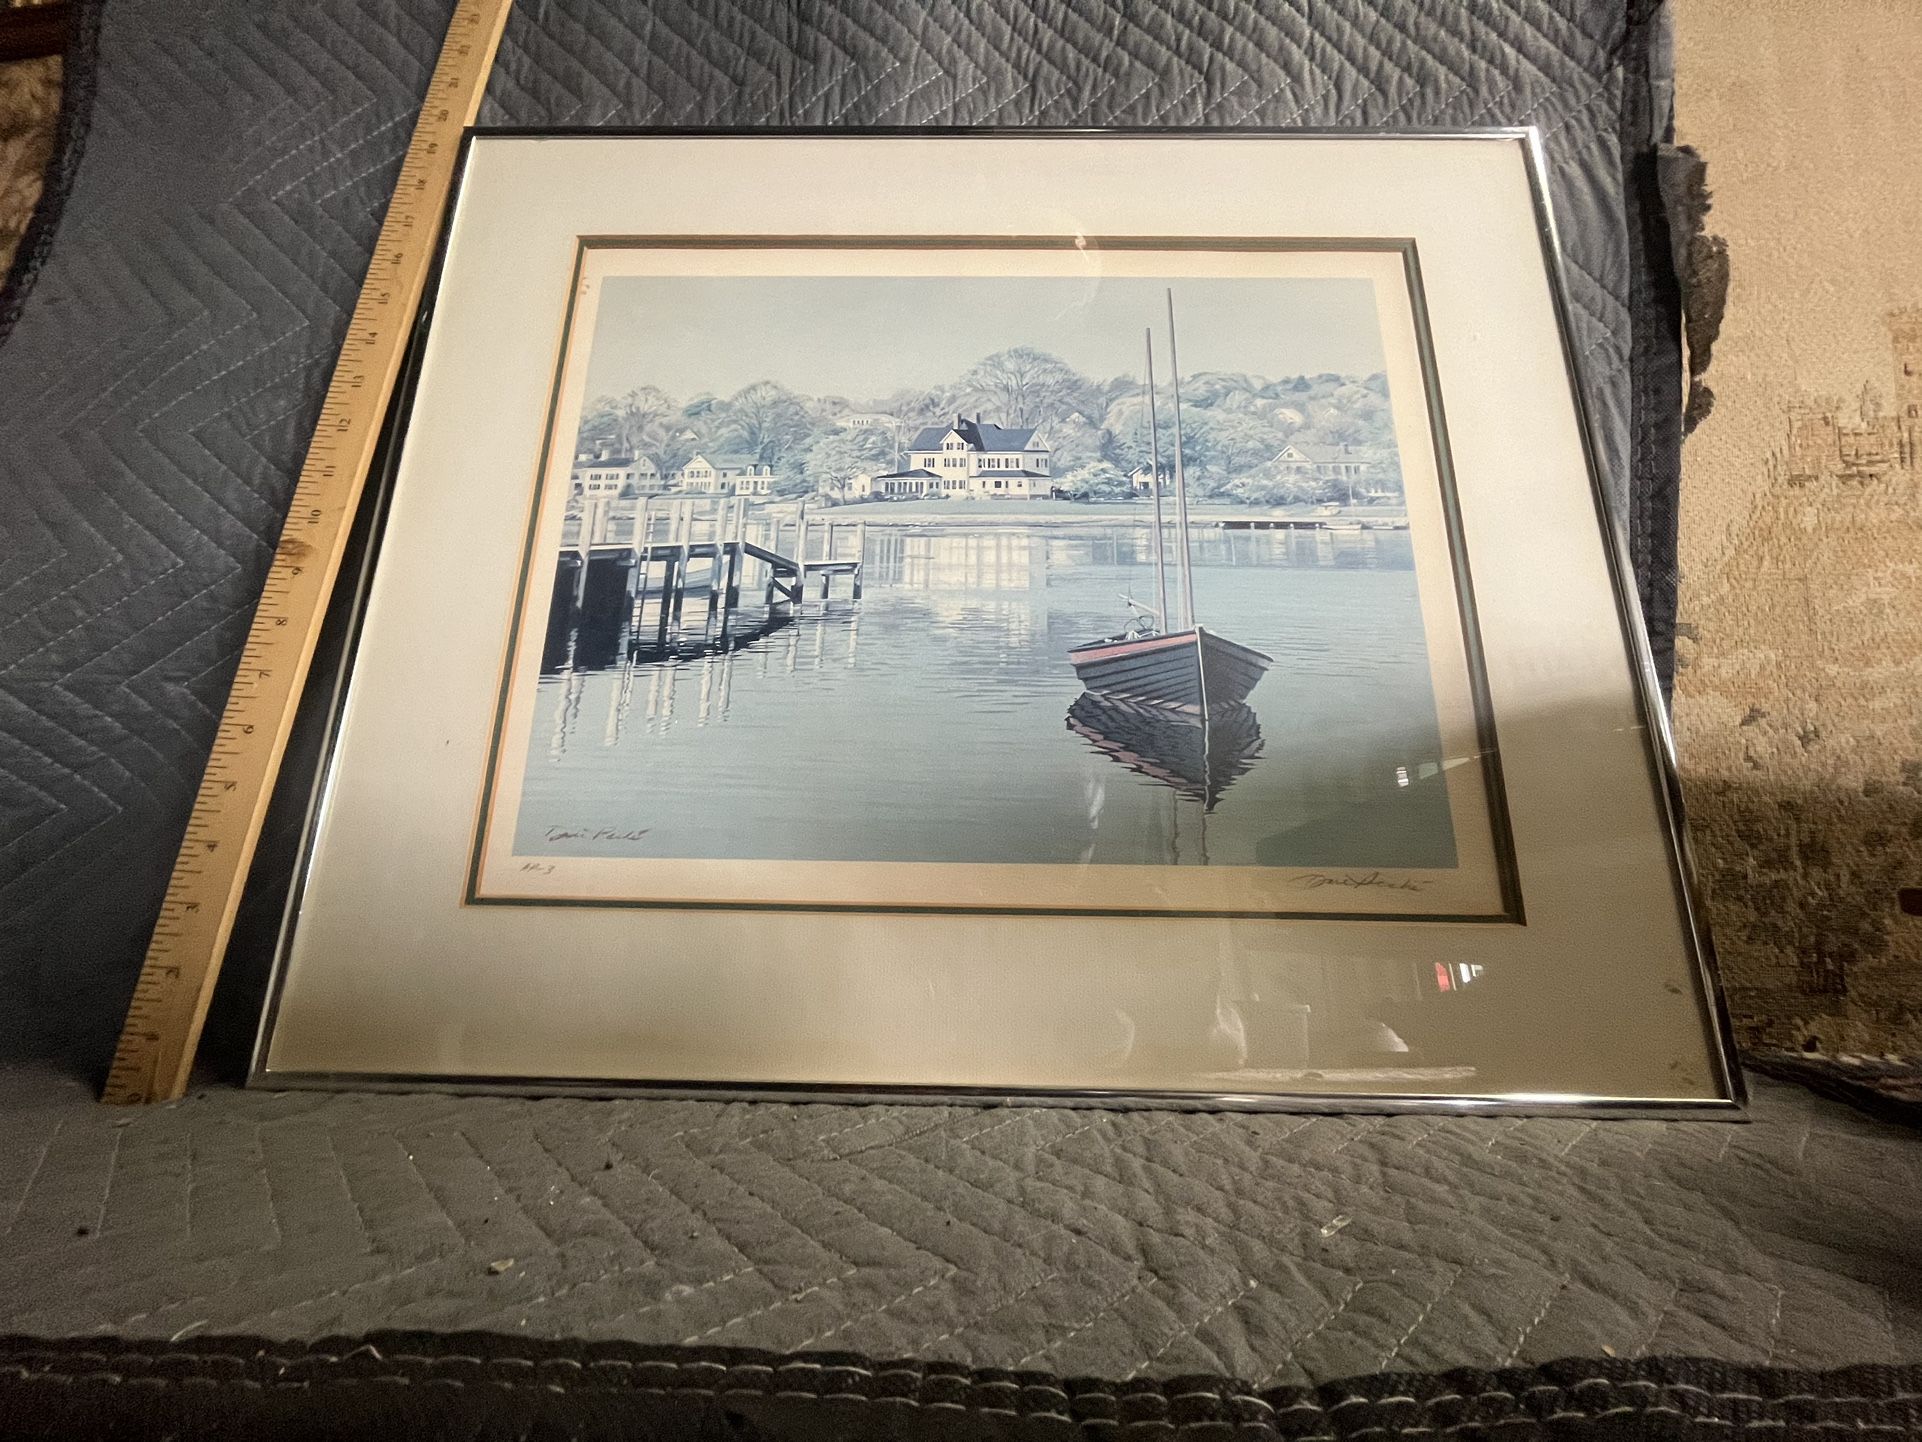 Artwork Of Boat Pencil Signed By Artist 